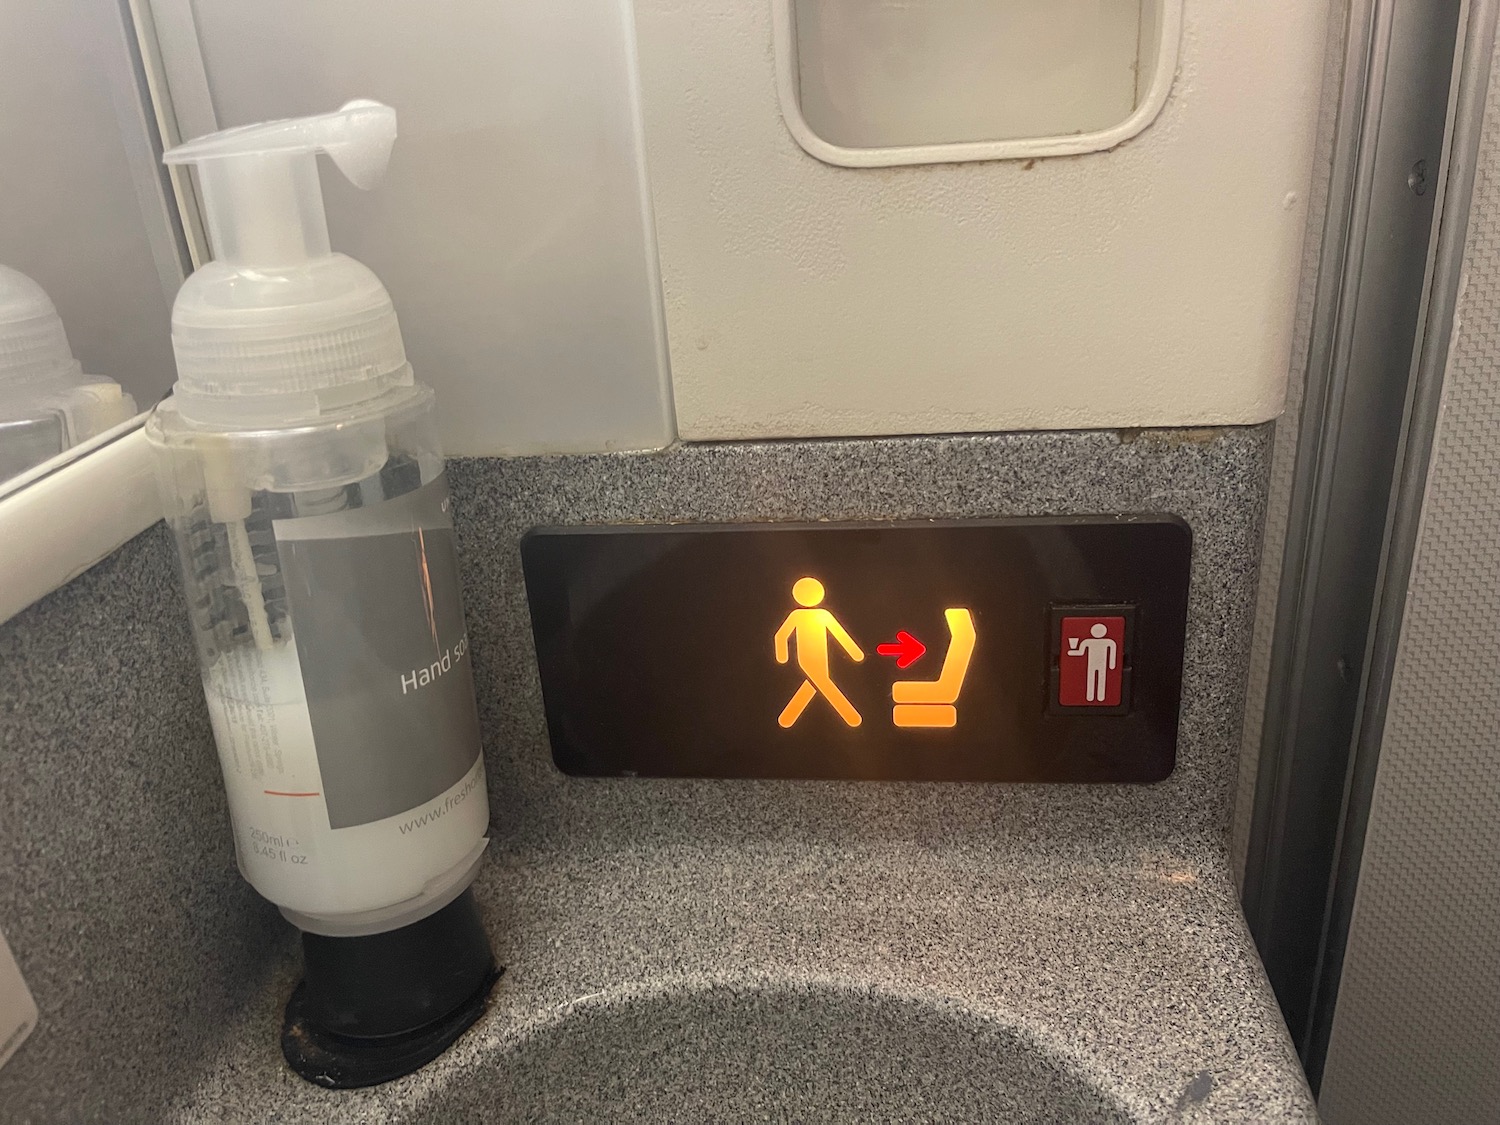 a hand sanitizer and a sign on a sink